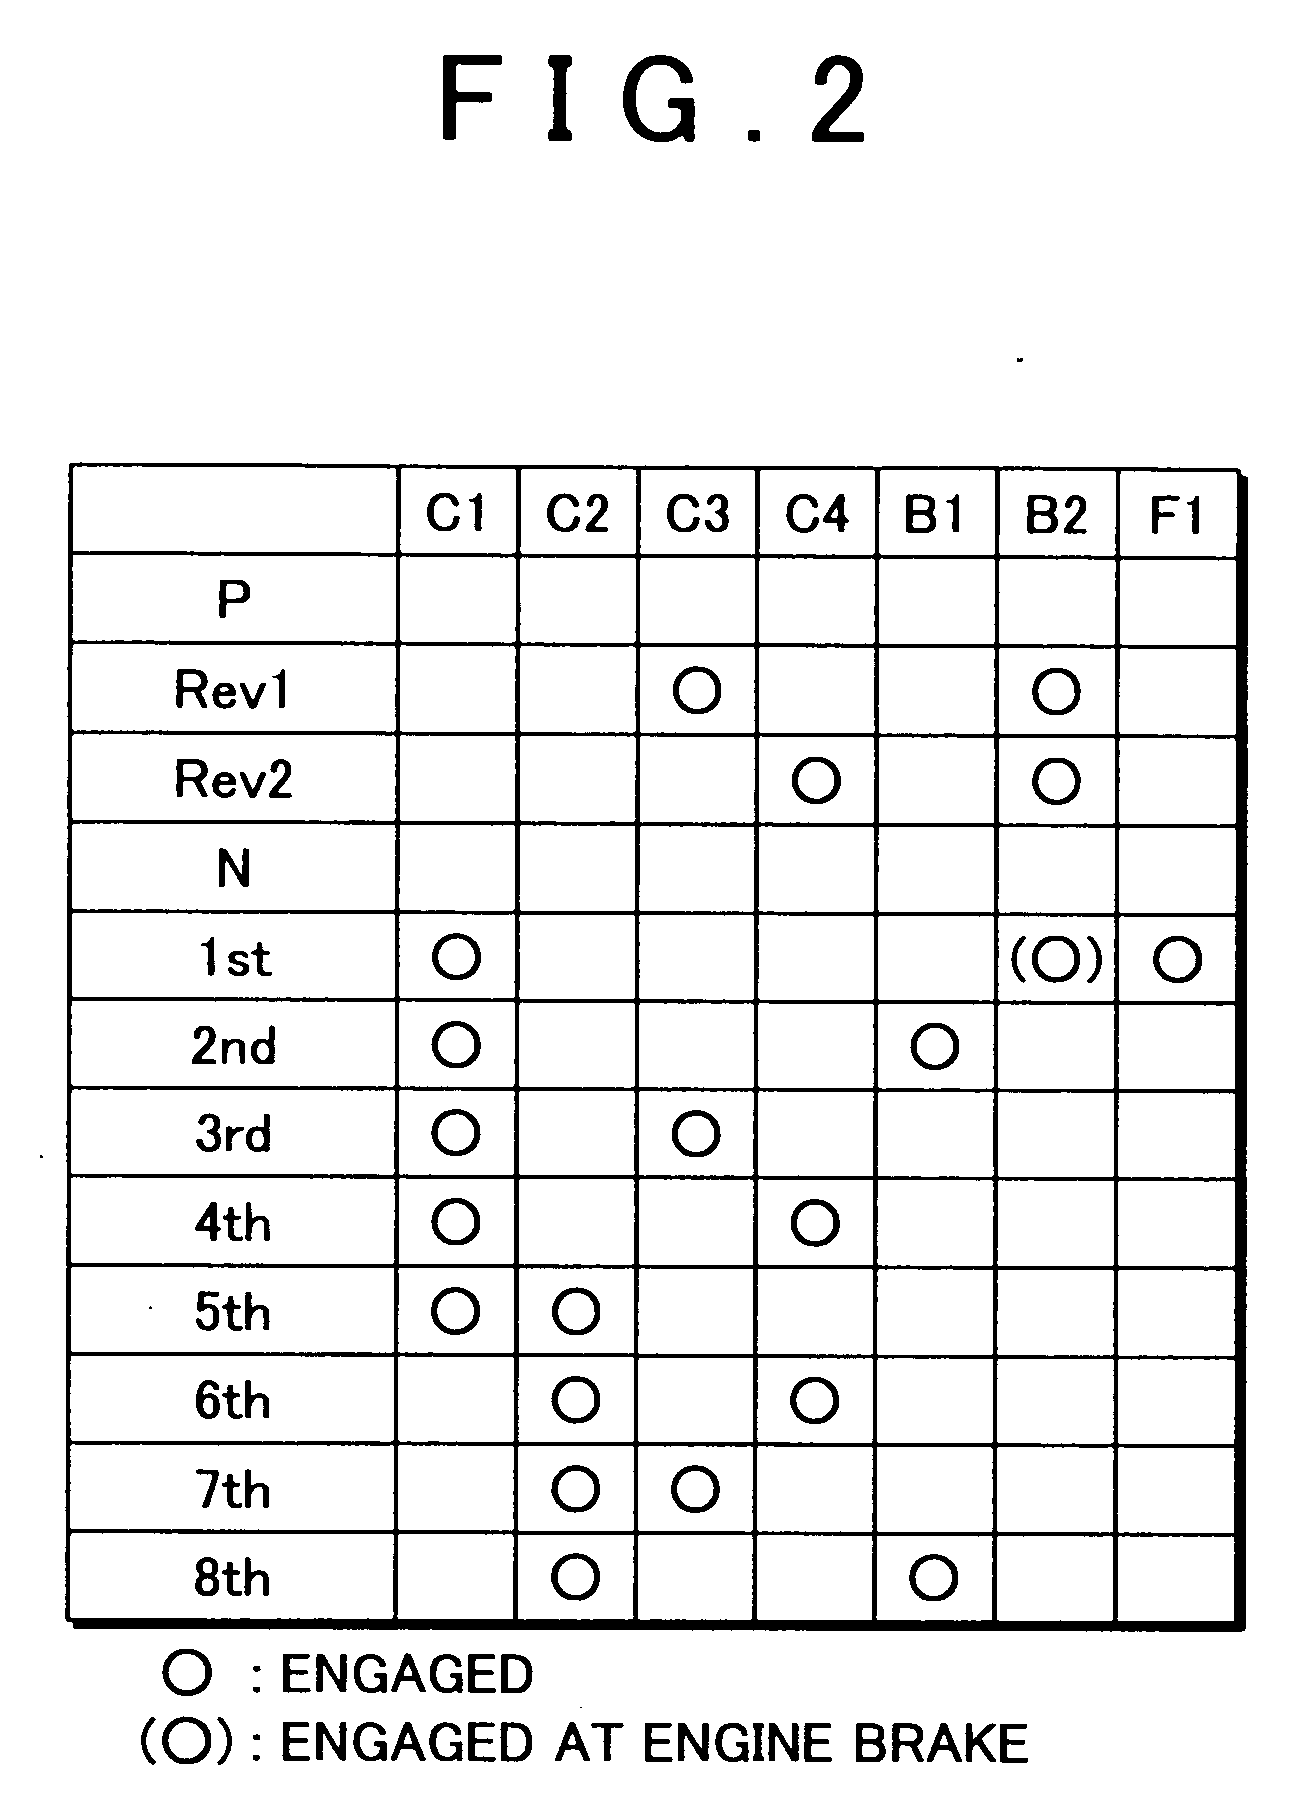 Control apparatus of vehicular automatic transmission